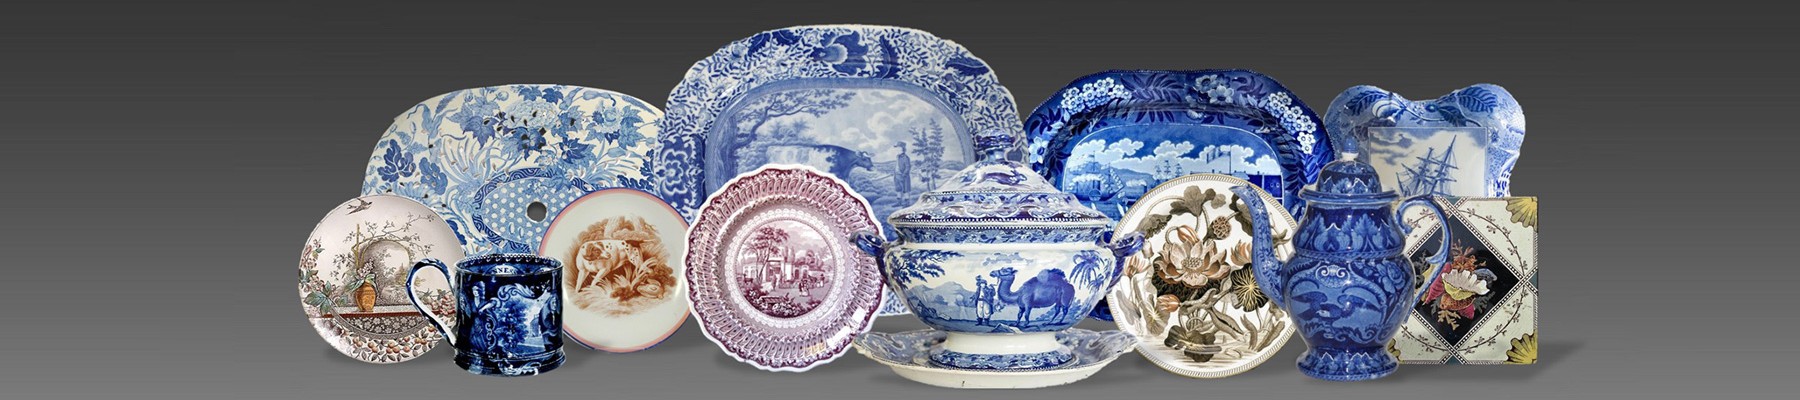 arrangement of items colored and blue transferware